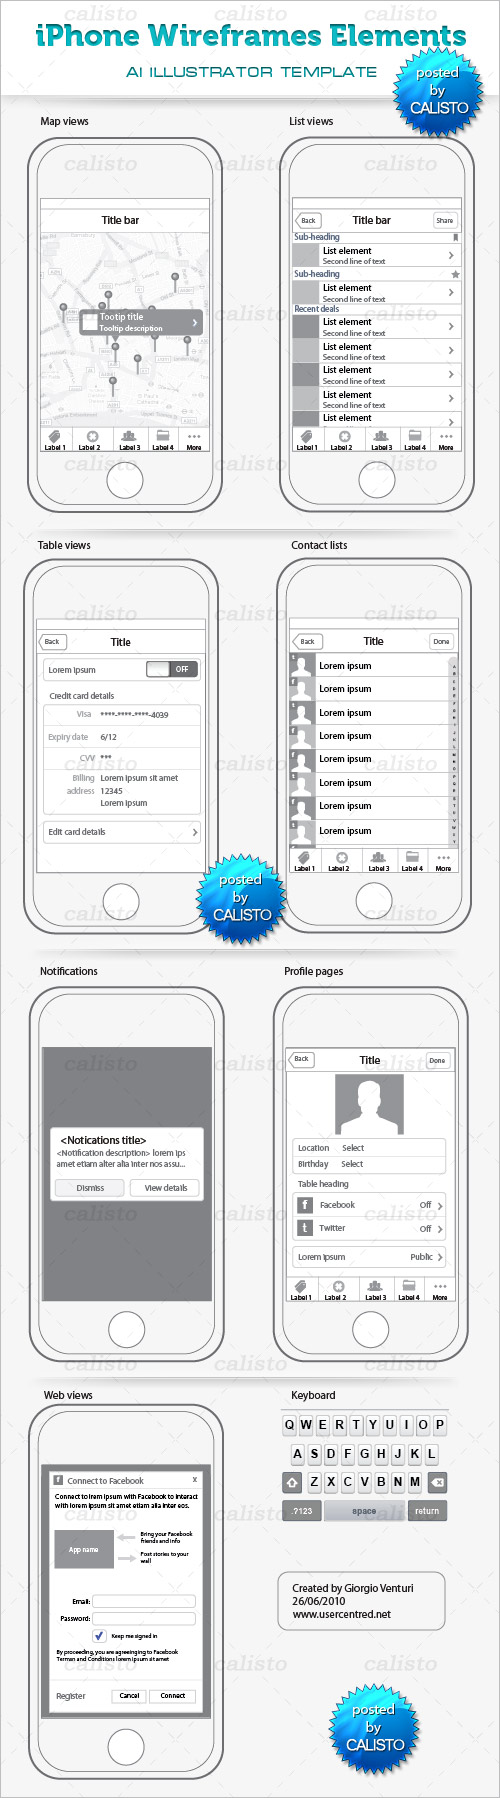 iPhone wireframes elements